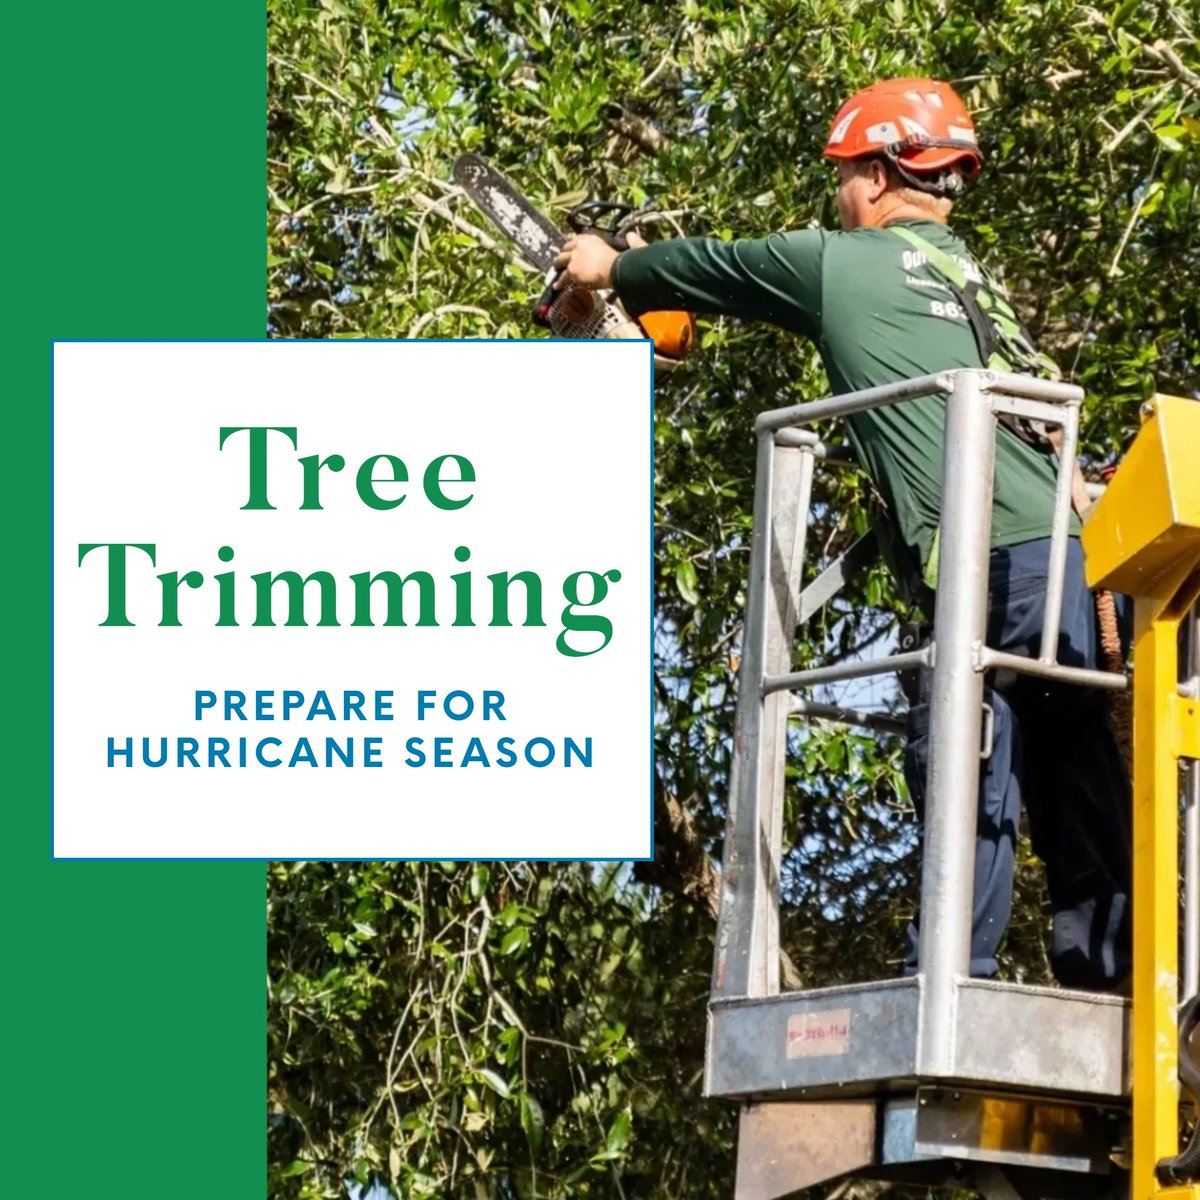 Hurricane season is upon us! Protect your home and property from flying tree limbs by taking advantage of our tree trimming services now. Give us a call today at (863) 557-9416. #DurhamsTreeService #TreeService #WinterHaven #PolkCounty #WinterHavenFL